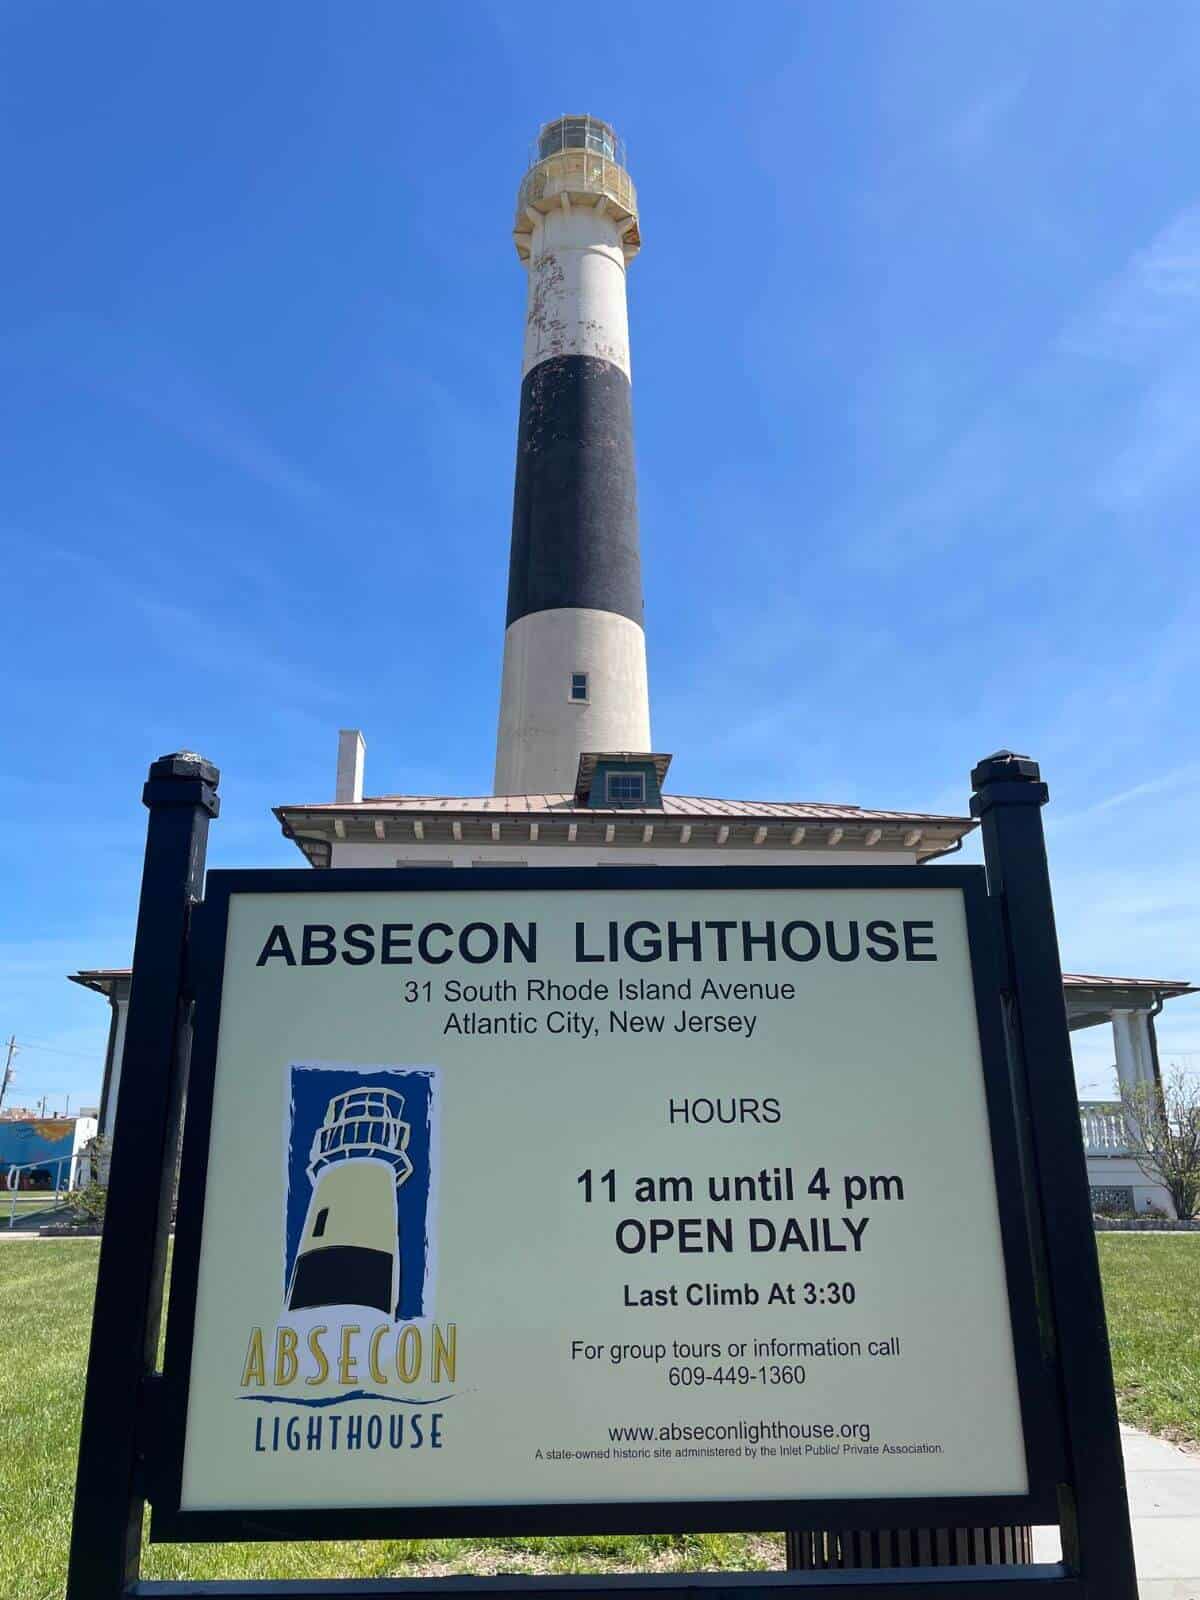 Absecon lighthouse sign in Atlantic City.